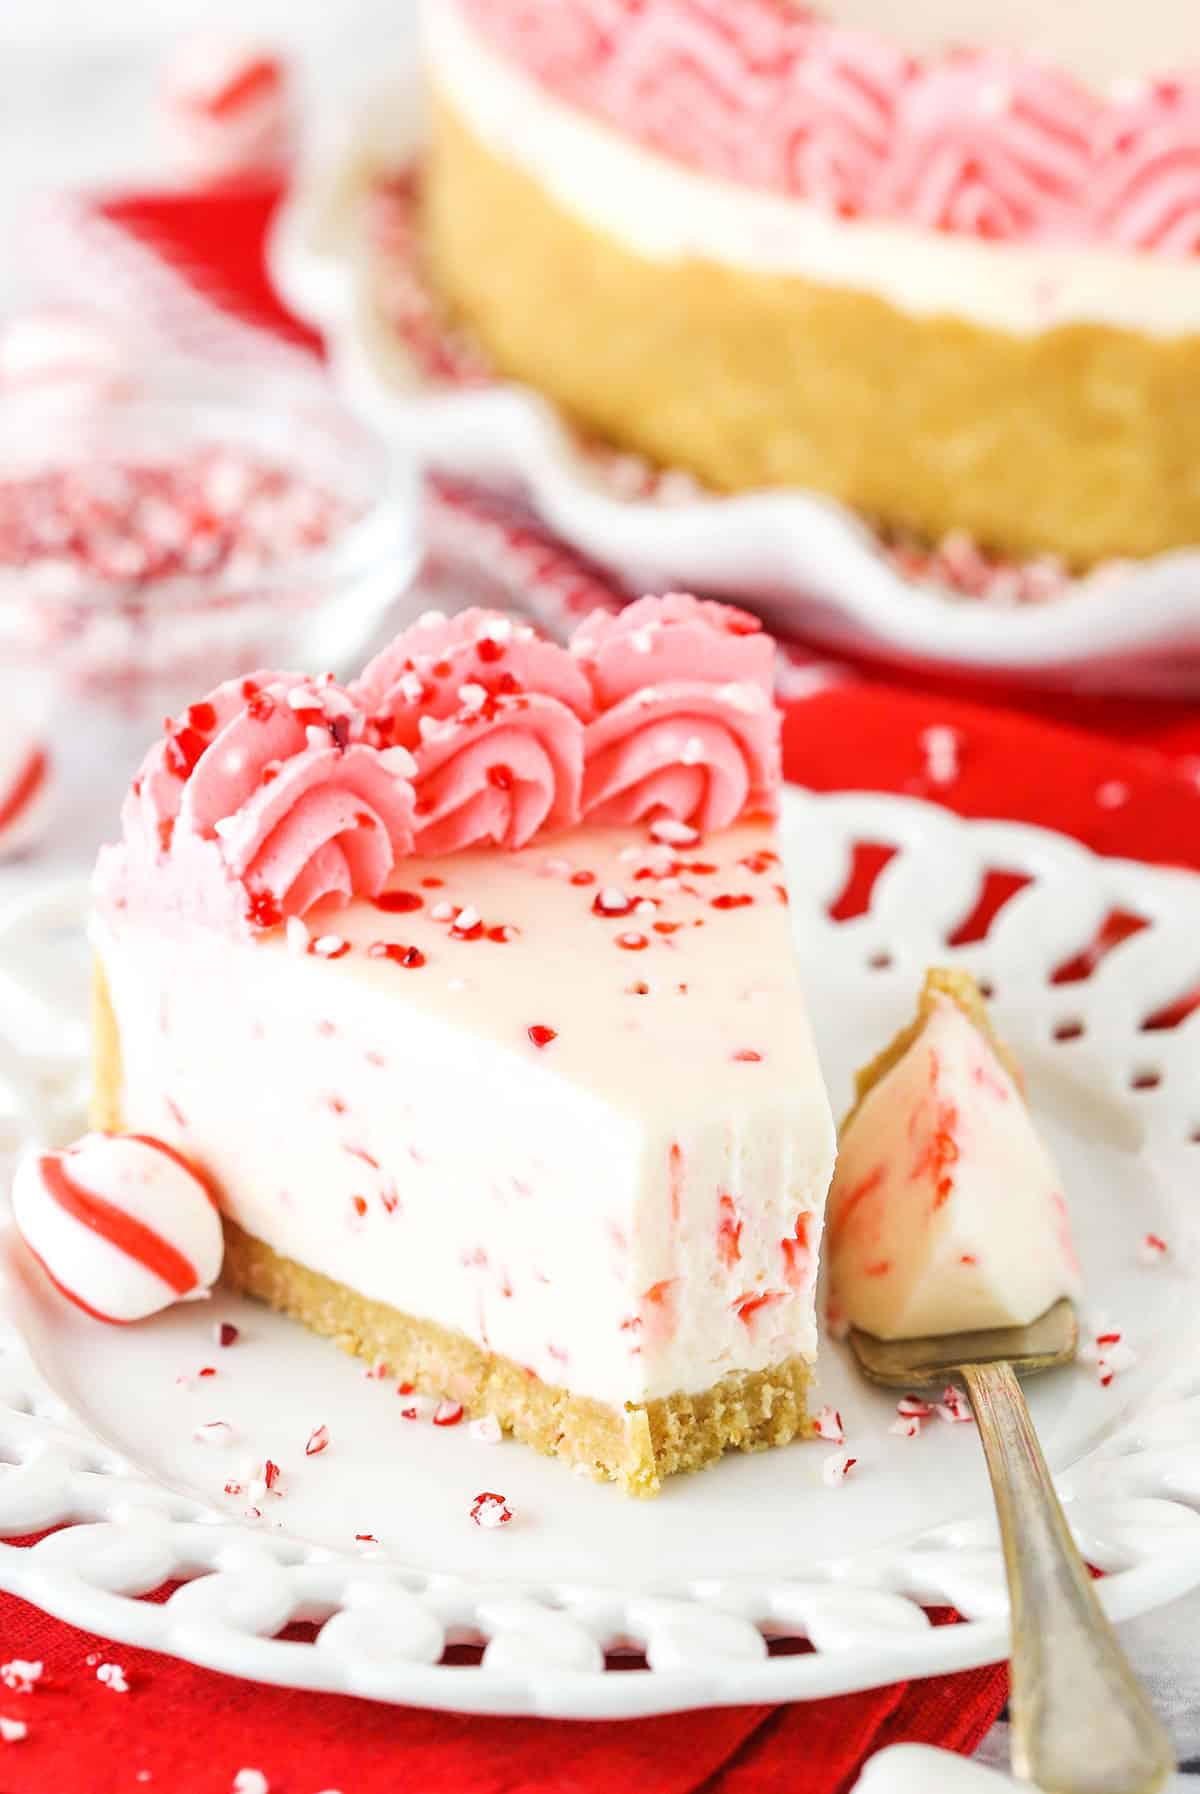 A Slice of Peppermint Cheesecake with One Bite on a Fork